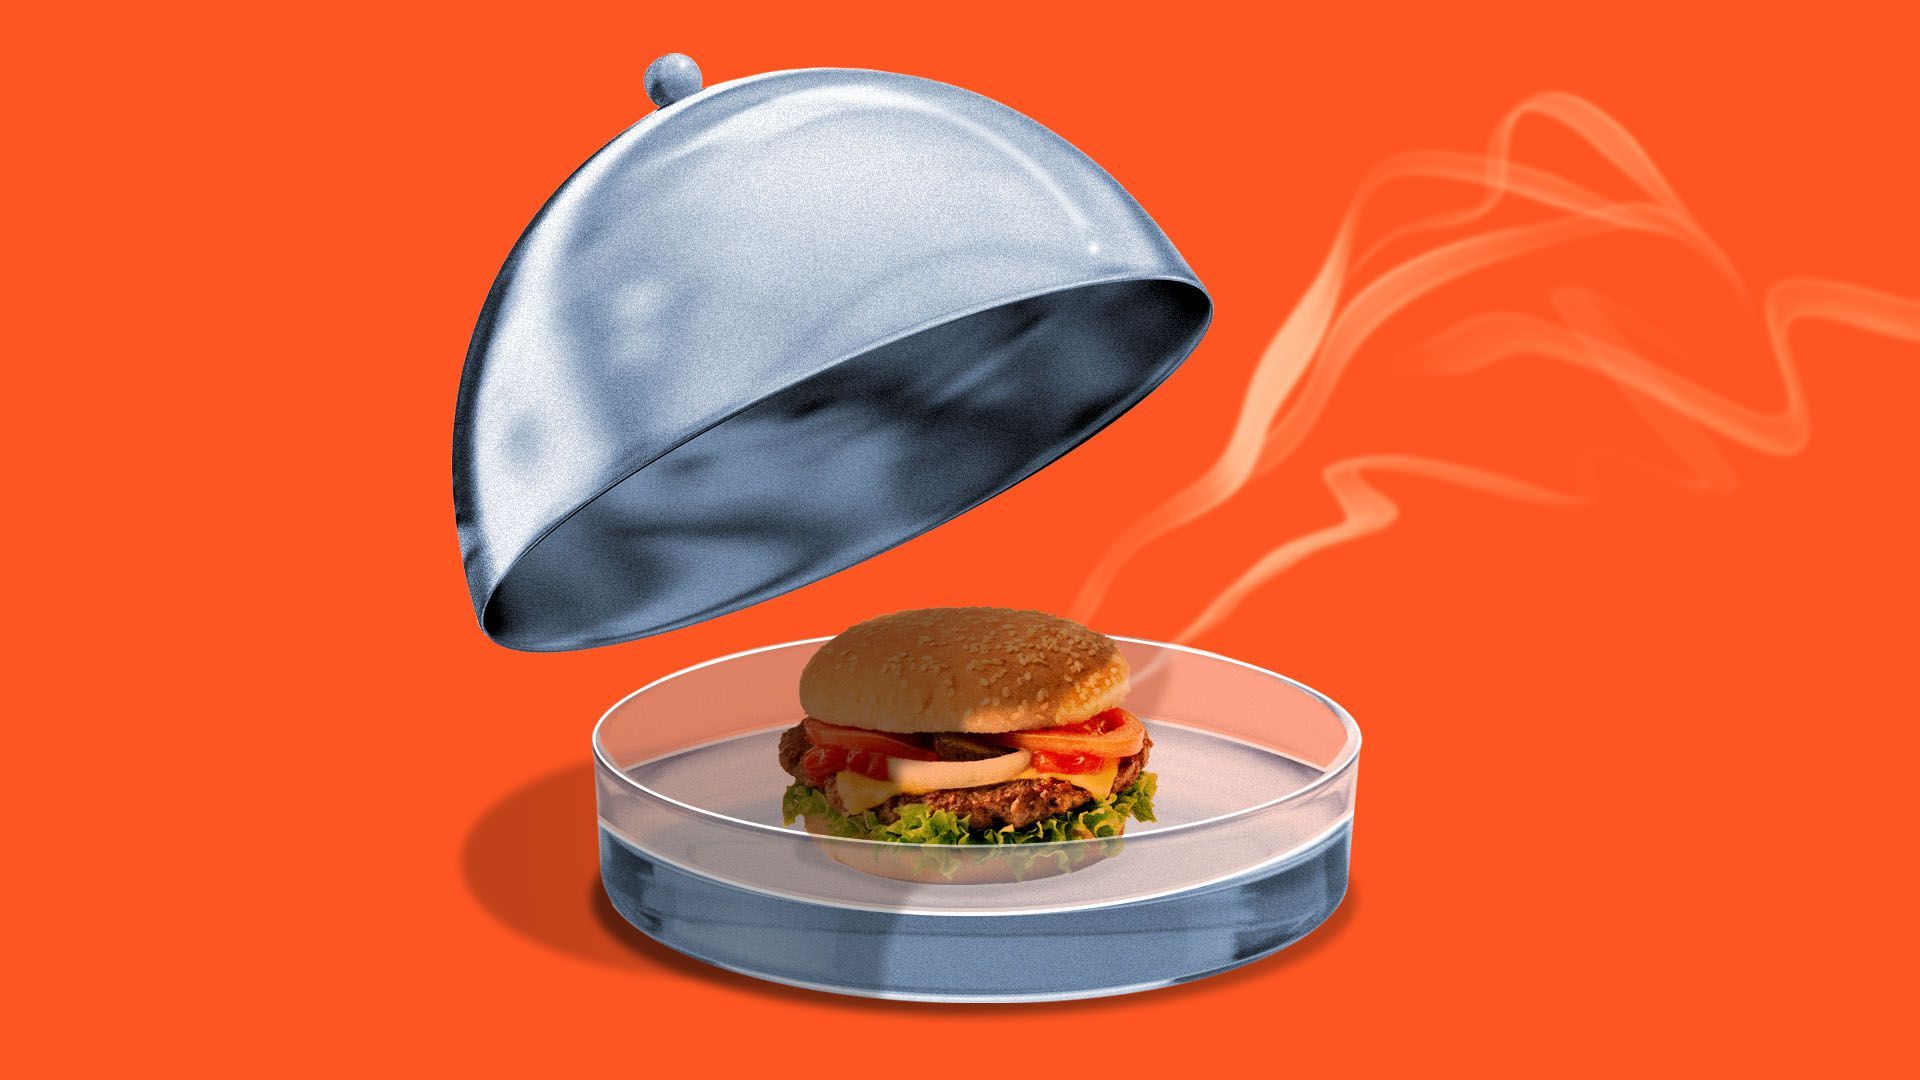 Illustration of a silver tray cover opening to reveal a petri dish with a cheeseburger inside